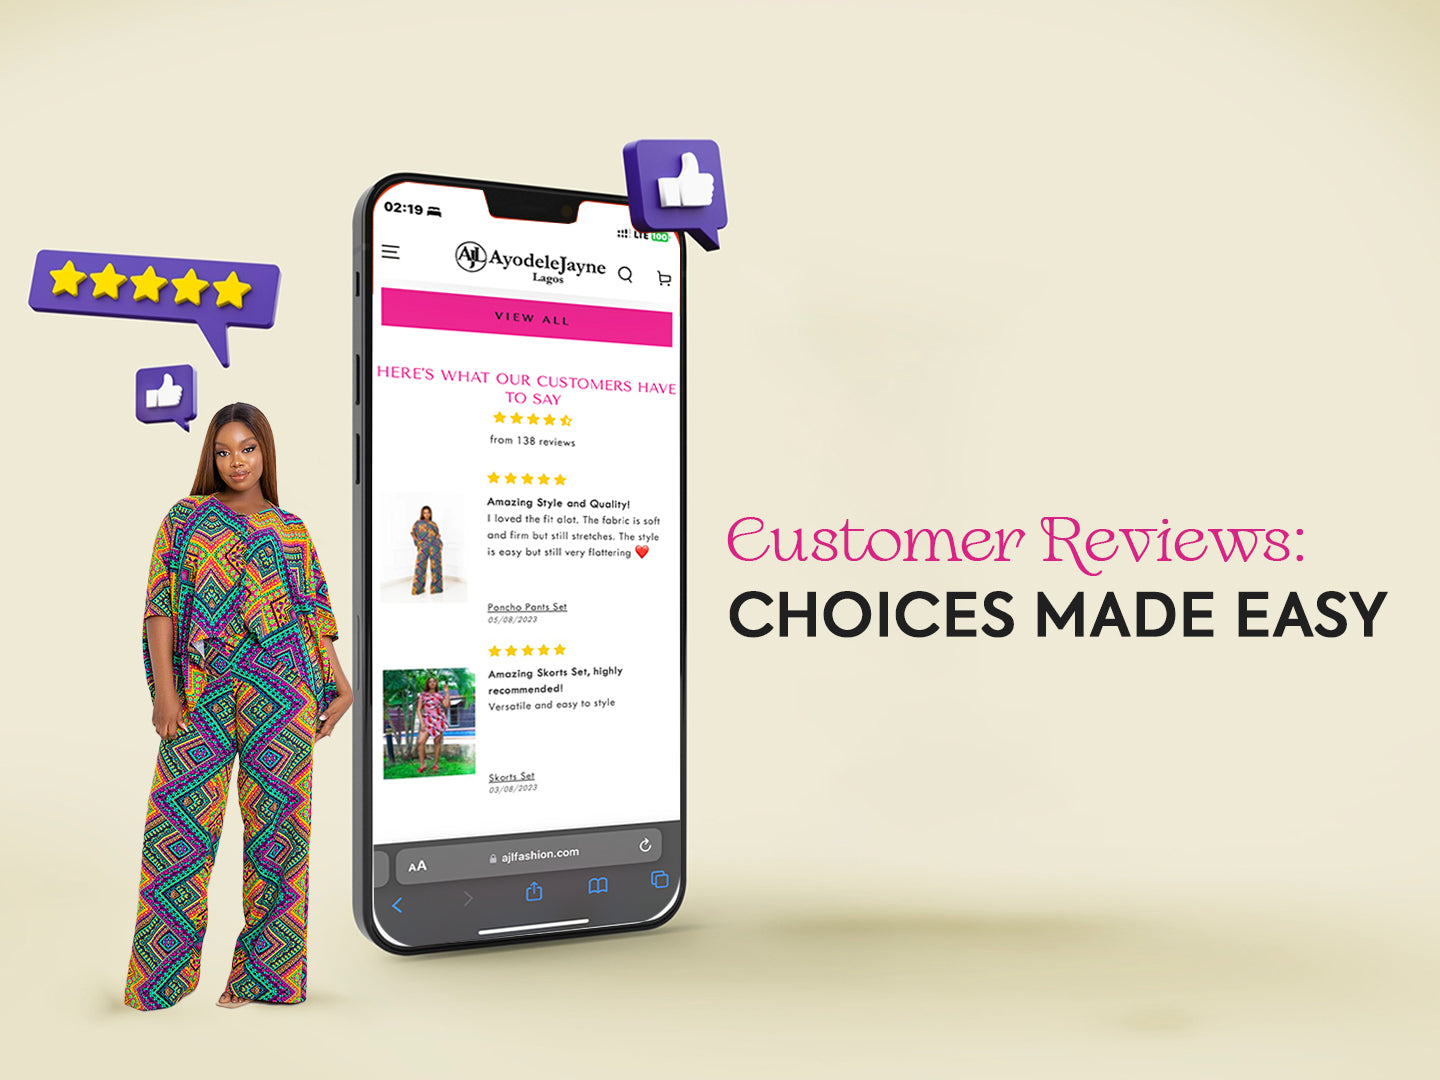 Customer Reviews: Choices Made Easy